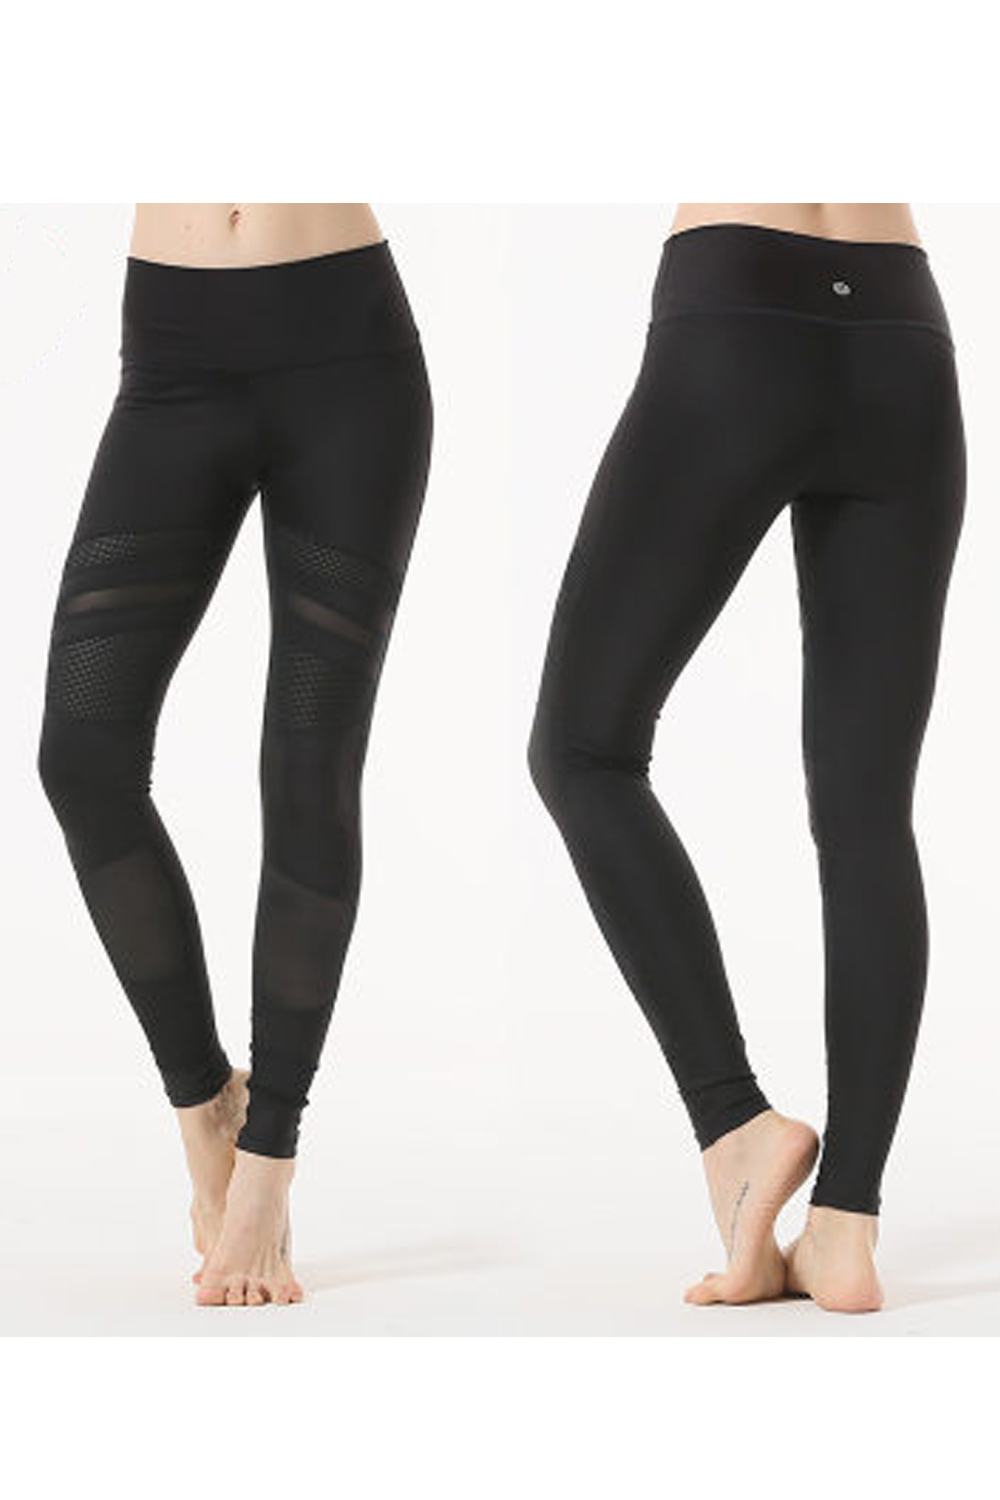 Selected Color is Thick Mesh Black Trousers